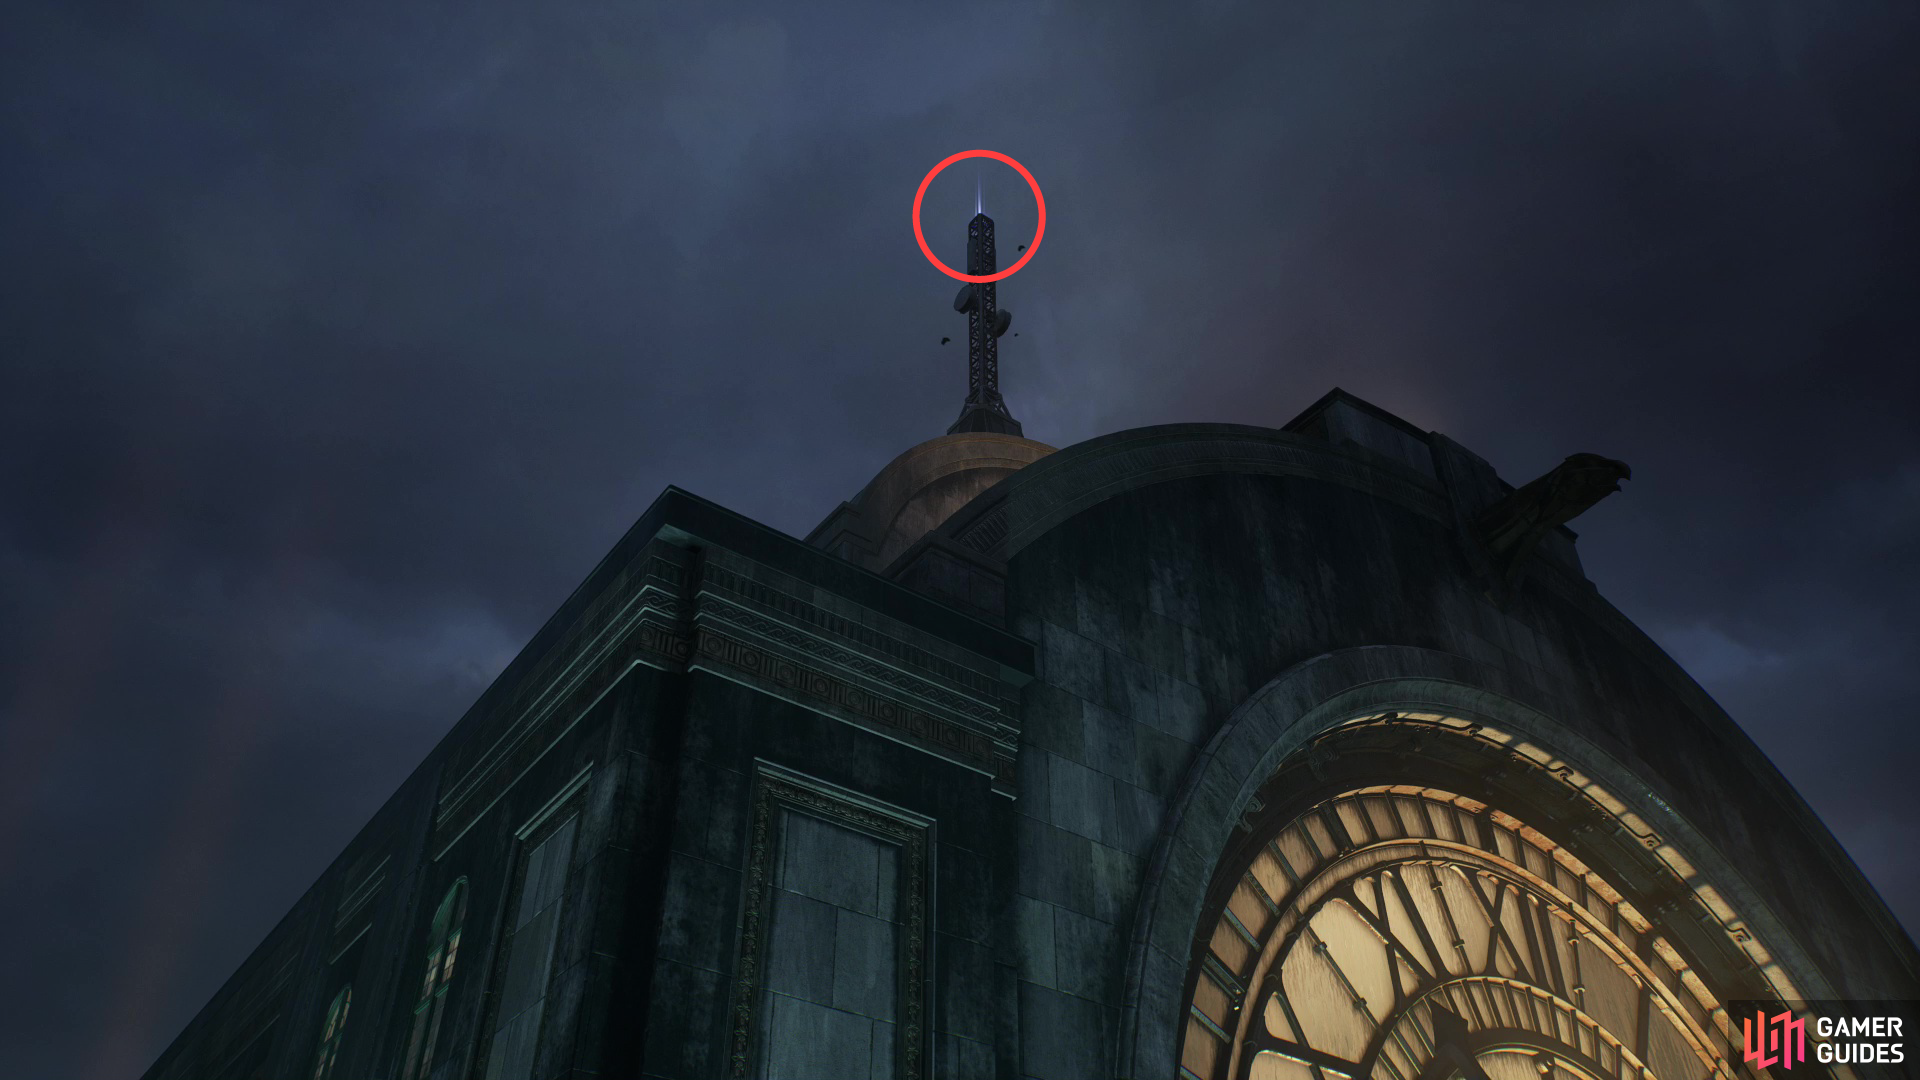 Home sweet home, you’ll find a Batarang atop the Union Station Belfry.